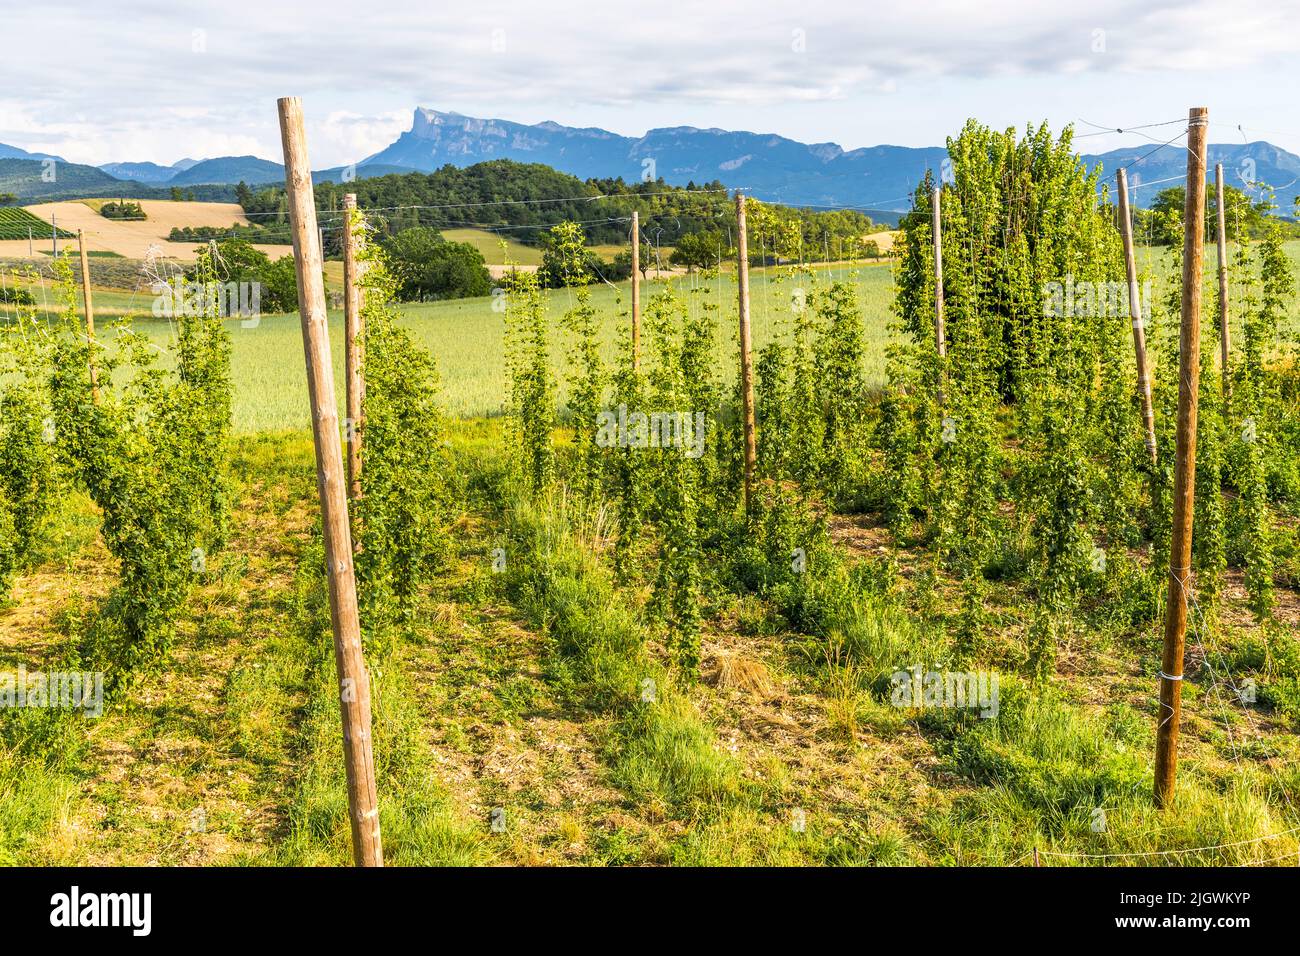 Trois Becs Brewery in Beaufort-sur-Gervanne, France. Hops from own cultivation. In the background you can see the Trois Becs mountain range that gives it its name Stock Photo